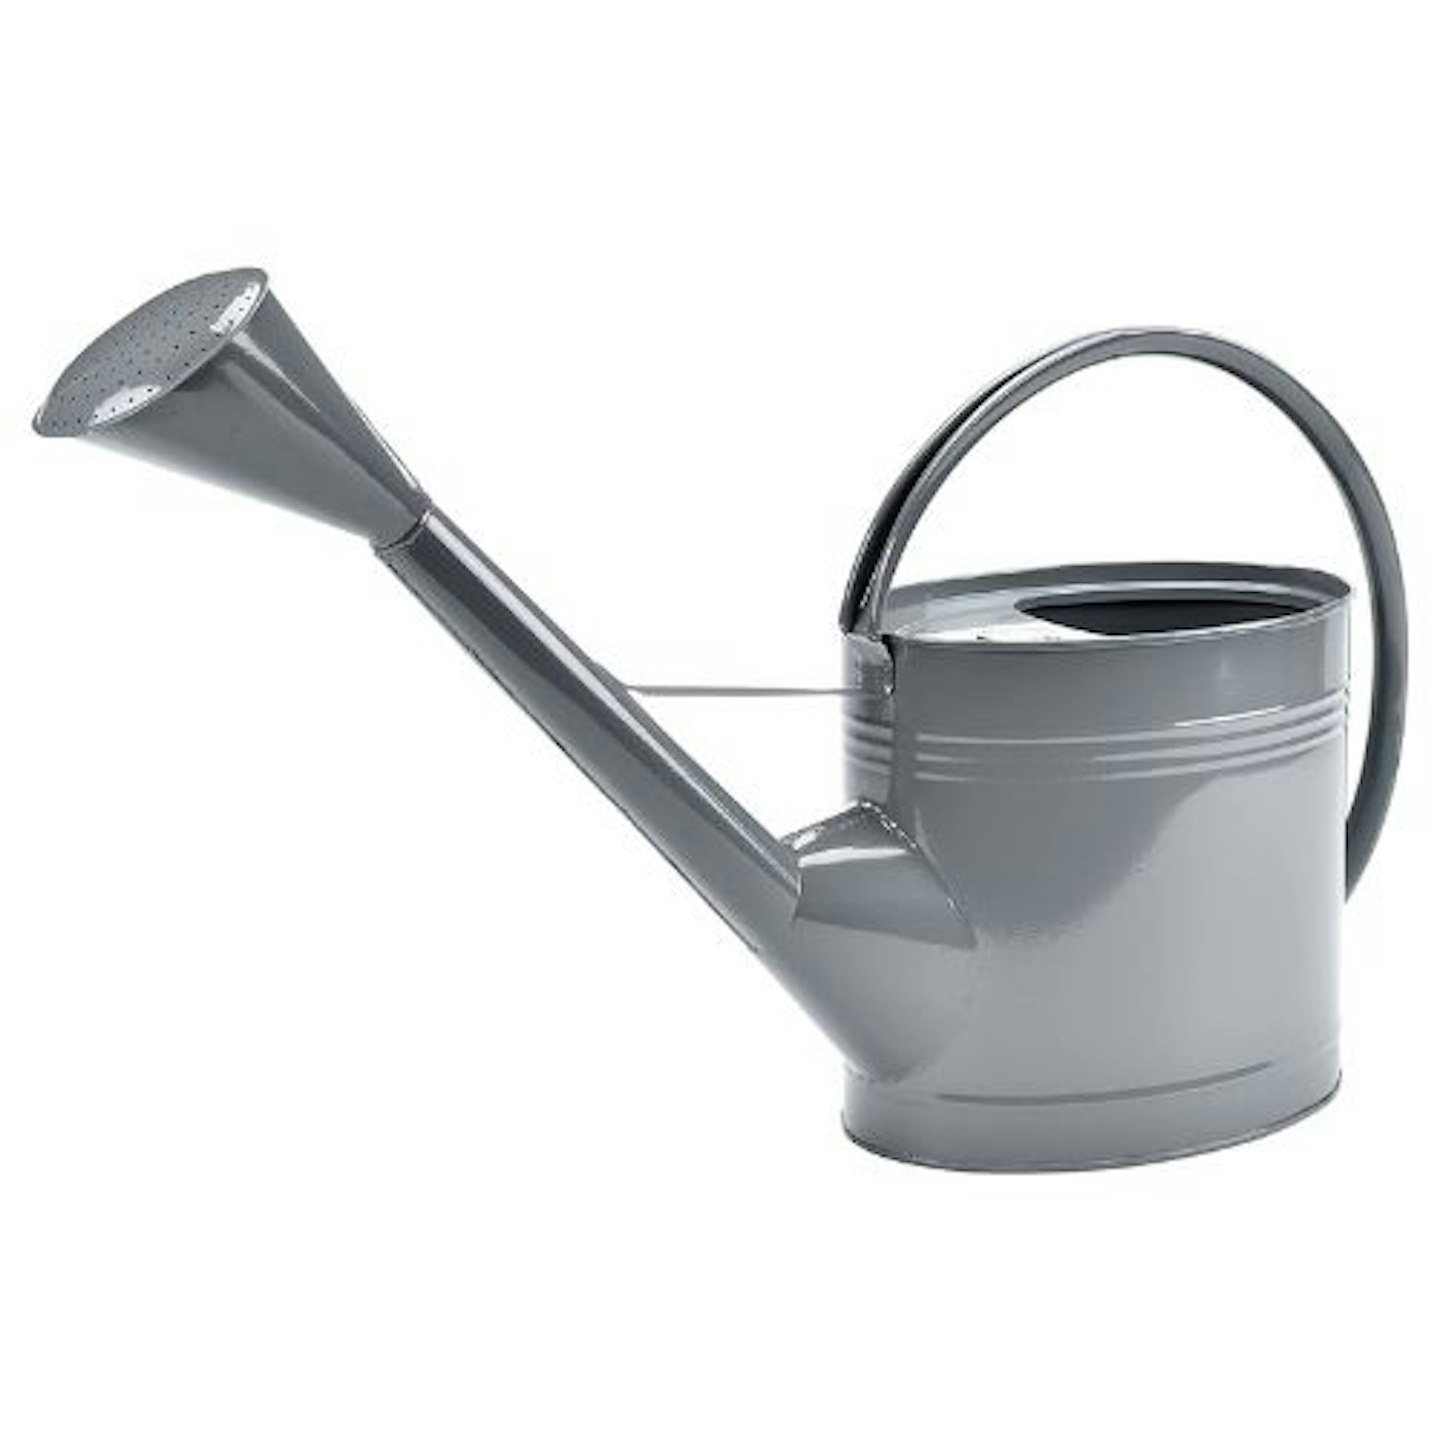 best-watering-cans-uk-burgon-ball-watering-can